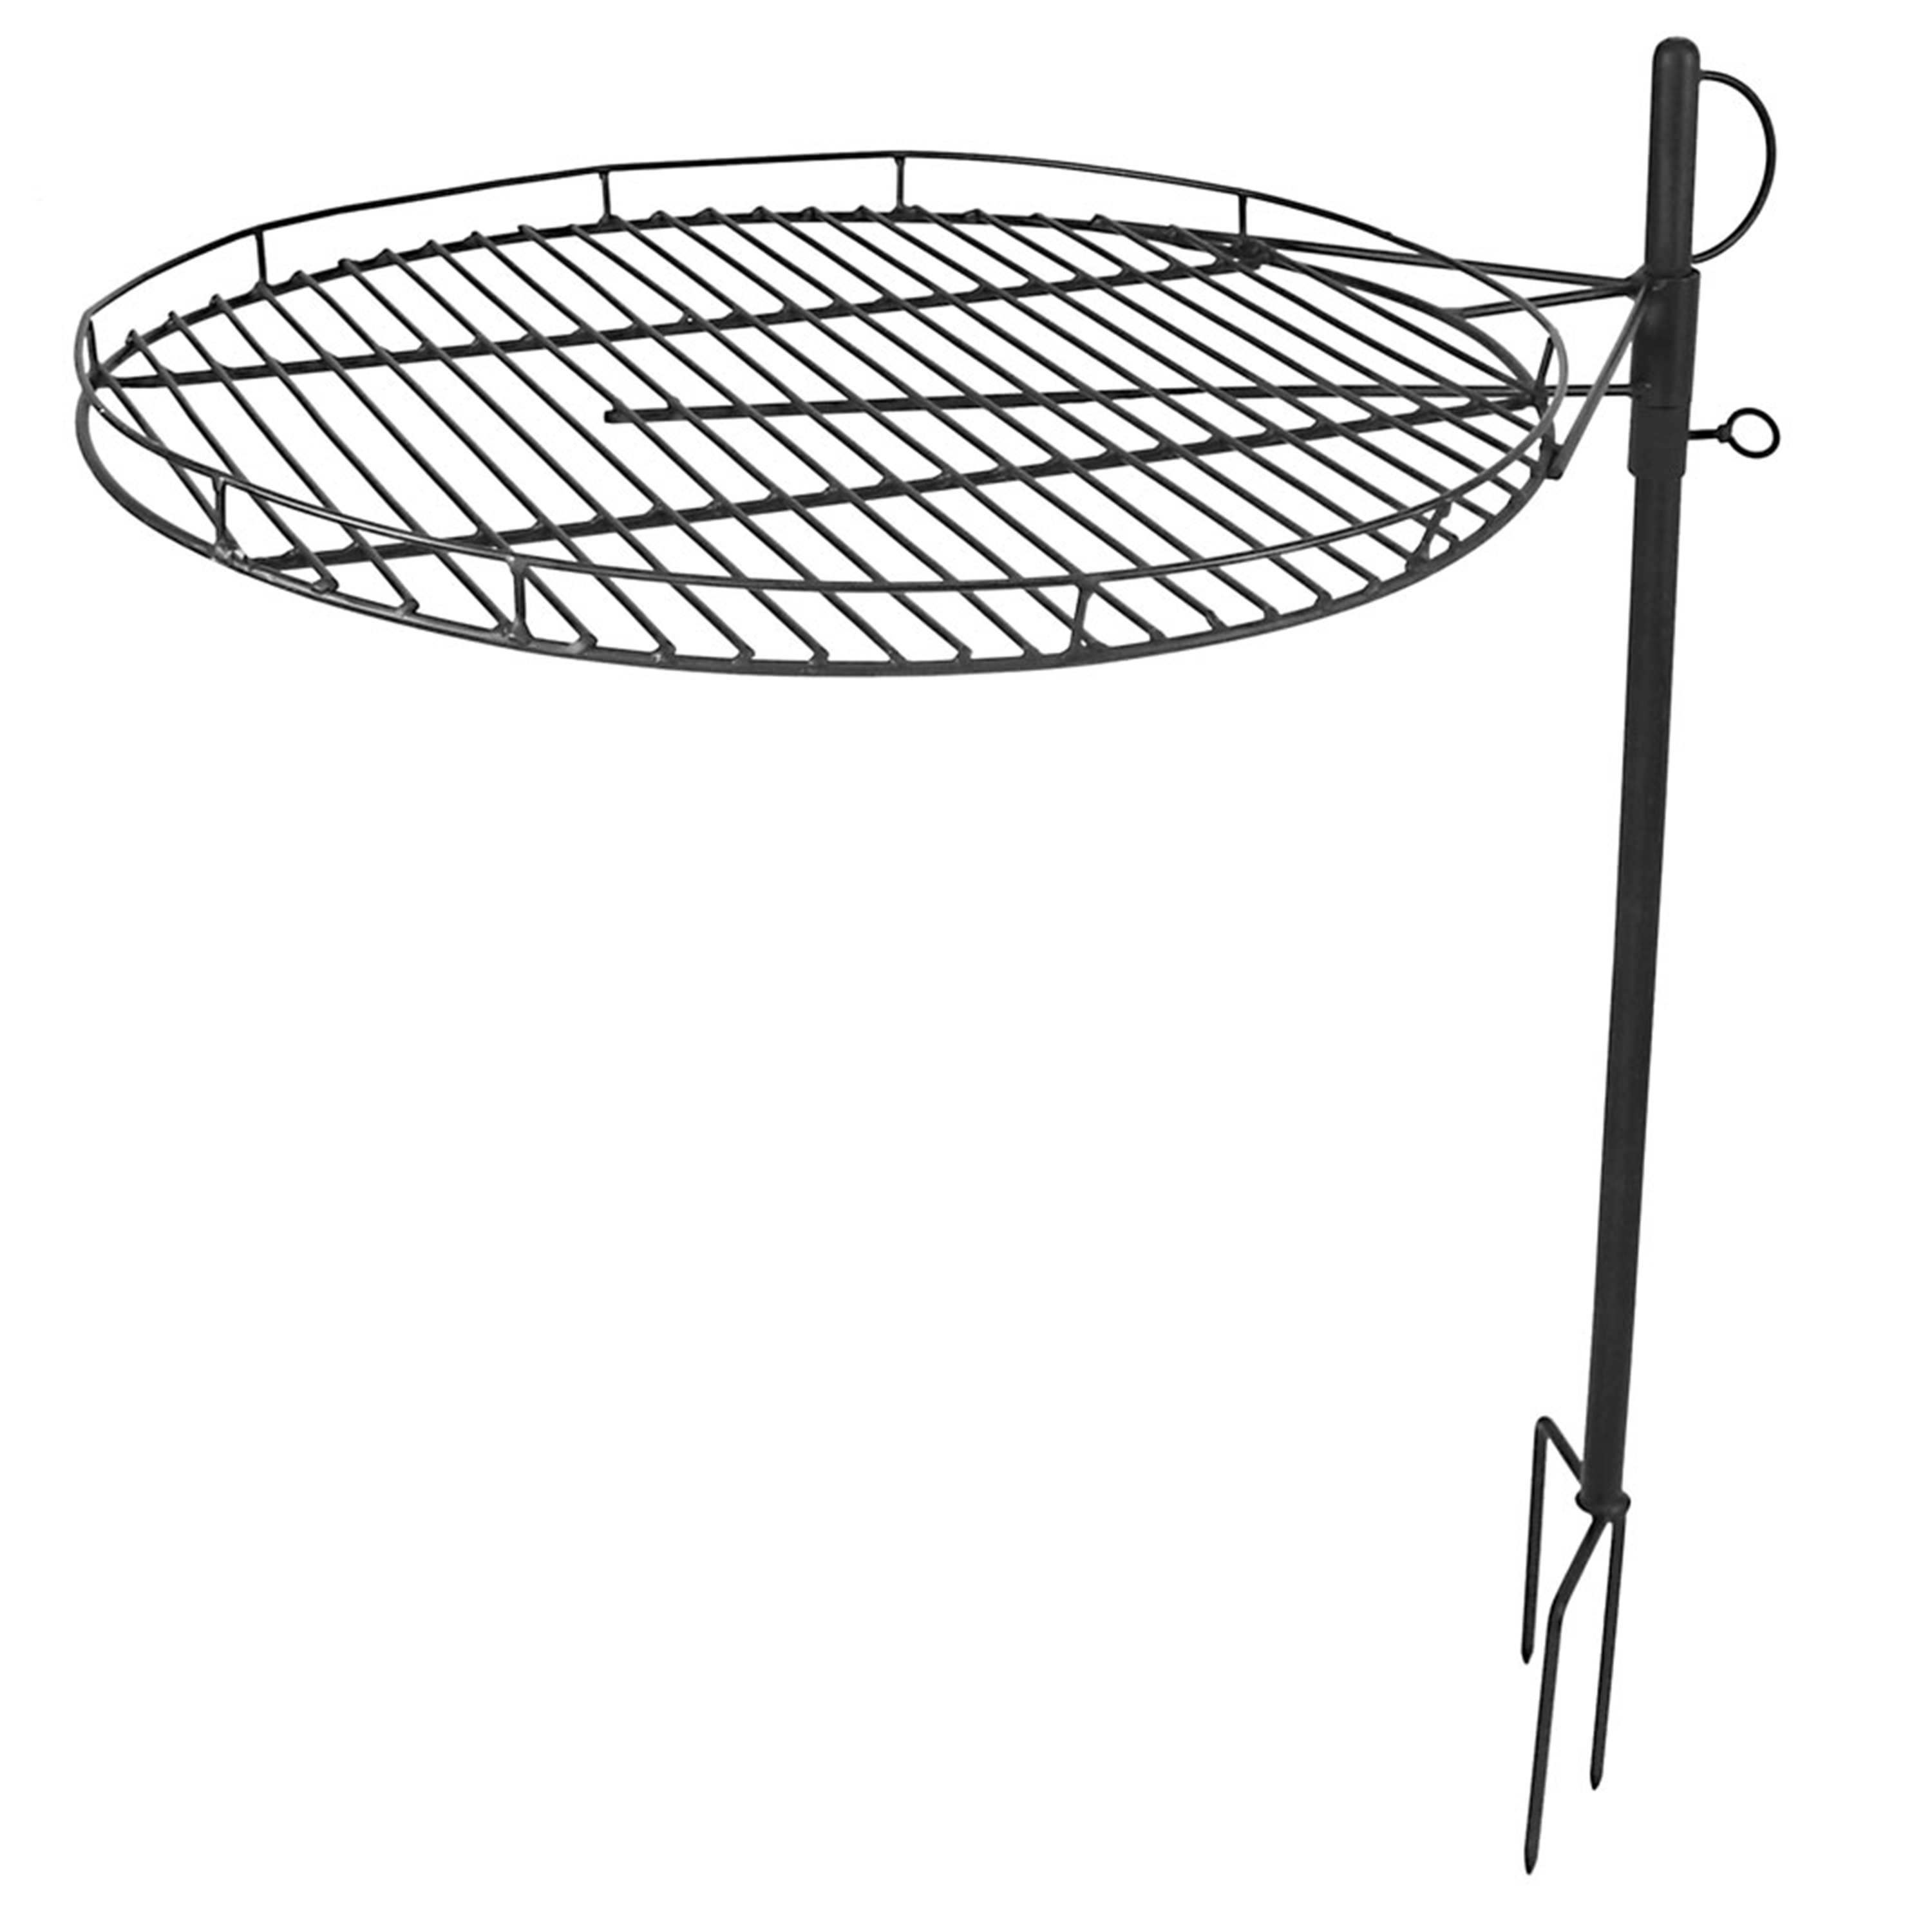 Steel Fire Pit Campfire Cooking Grill Swivel Set with Stand